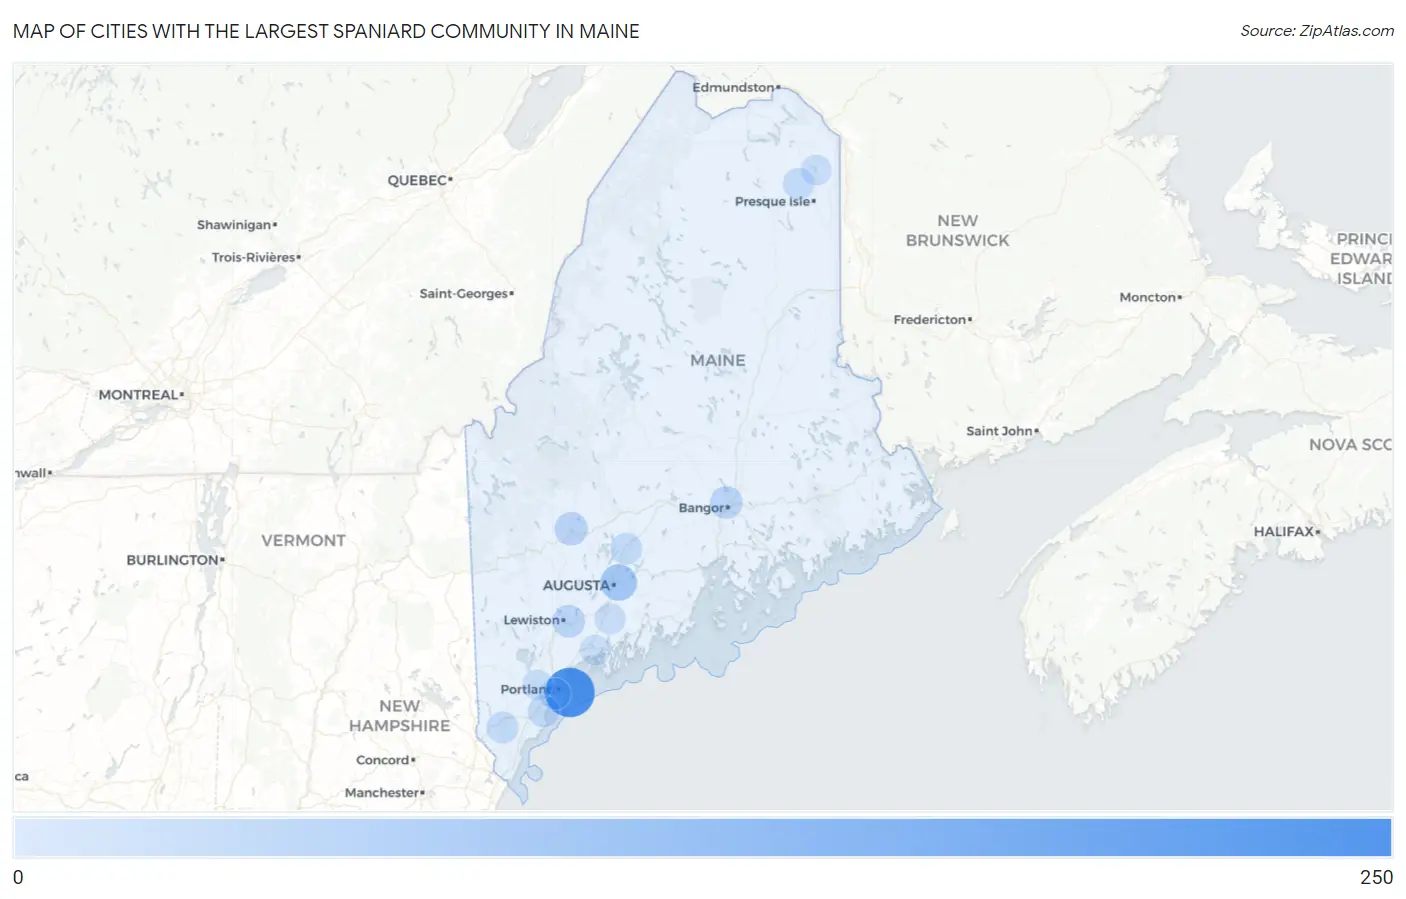 Cities with the Largest Spaniard Community in Maine Map